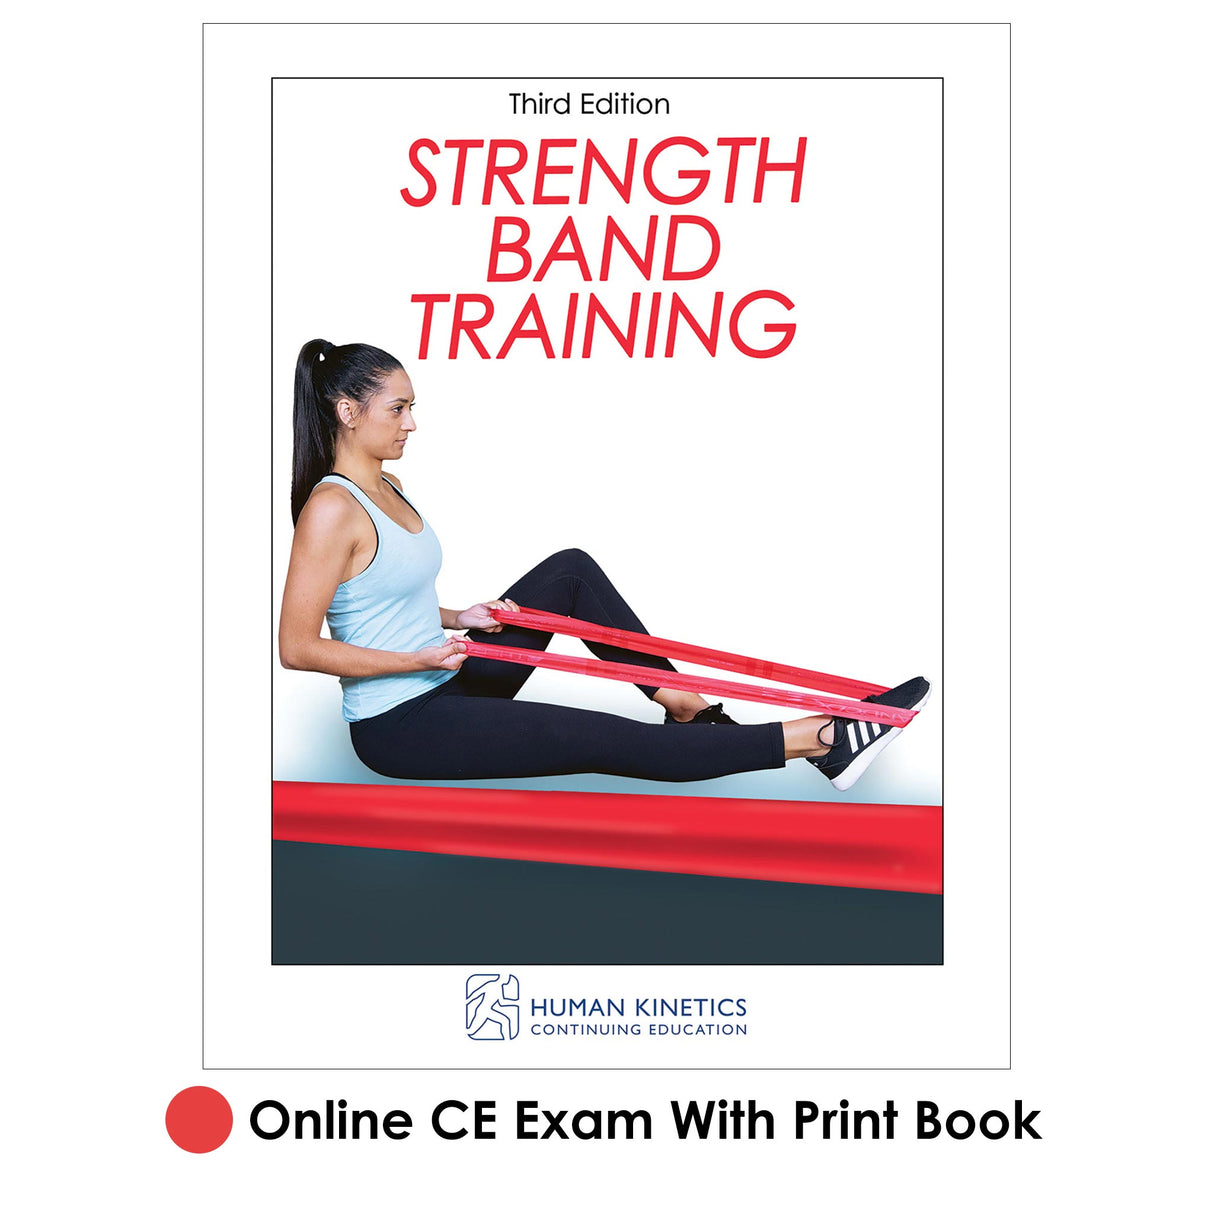 Strength Band Training 3rd Edition Online CE Exam With Print Book